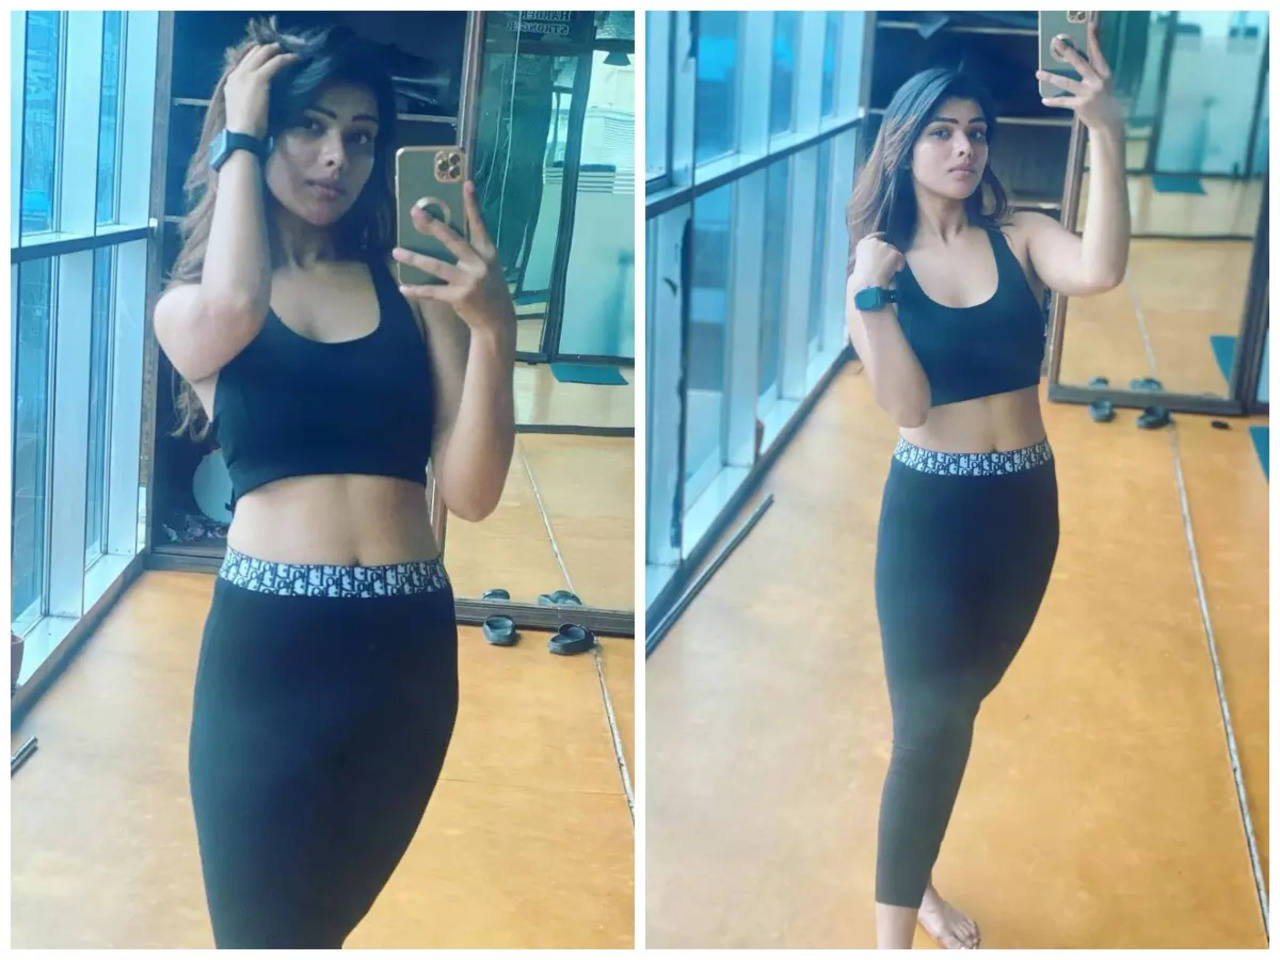 Mahima Gupta looks stunning as she poses in a black gym outfit | Bhojpuri  Movie News - Times of India